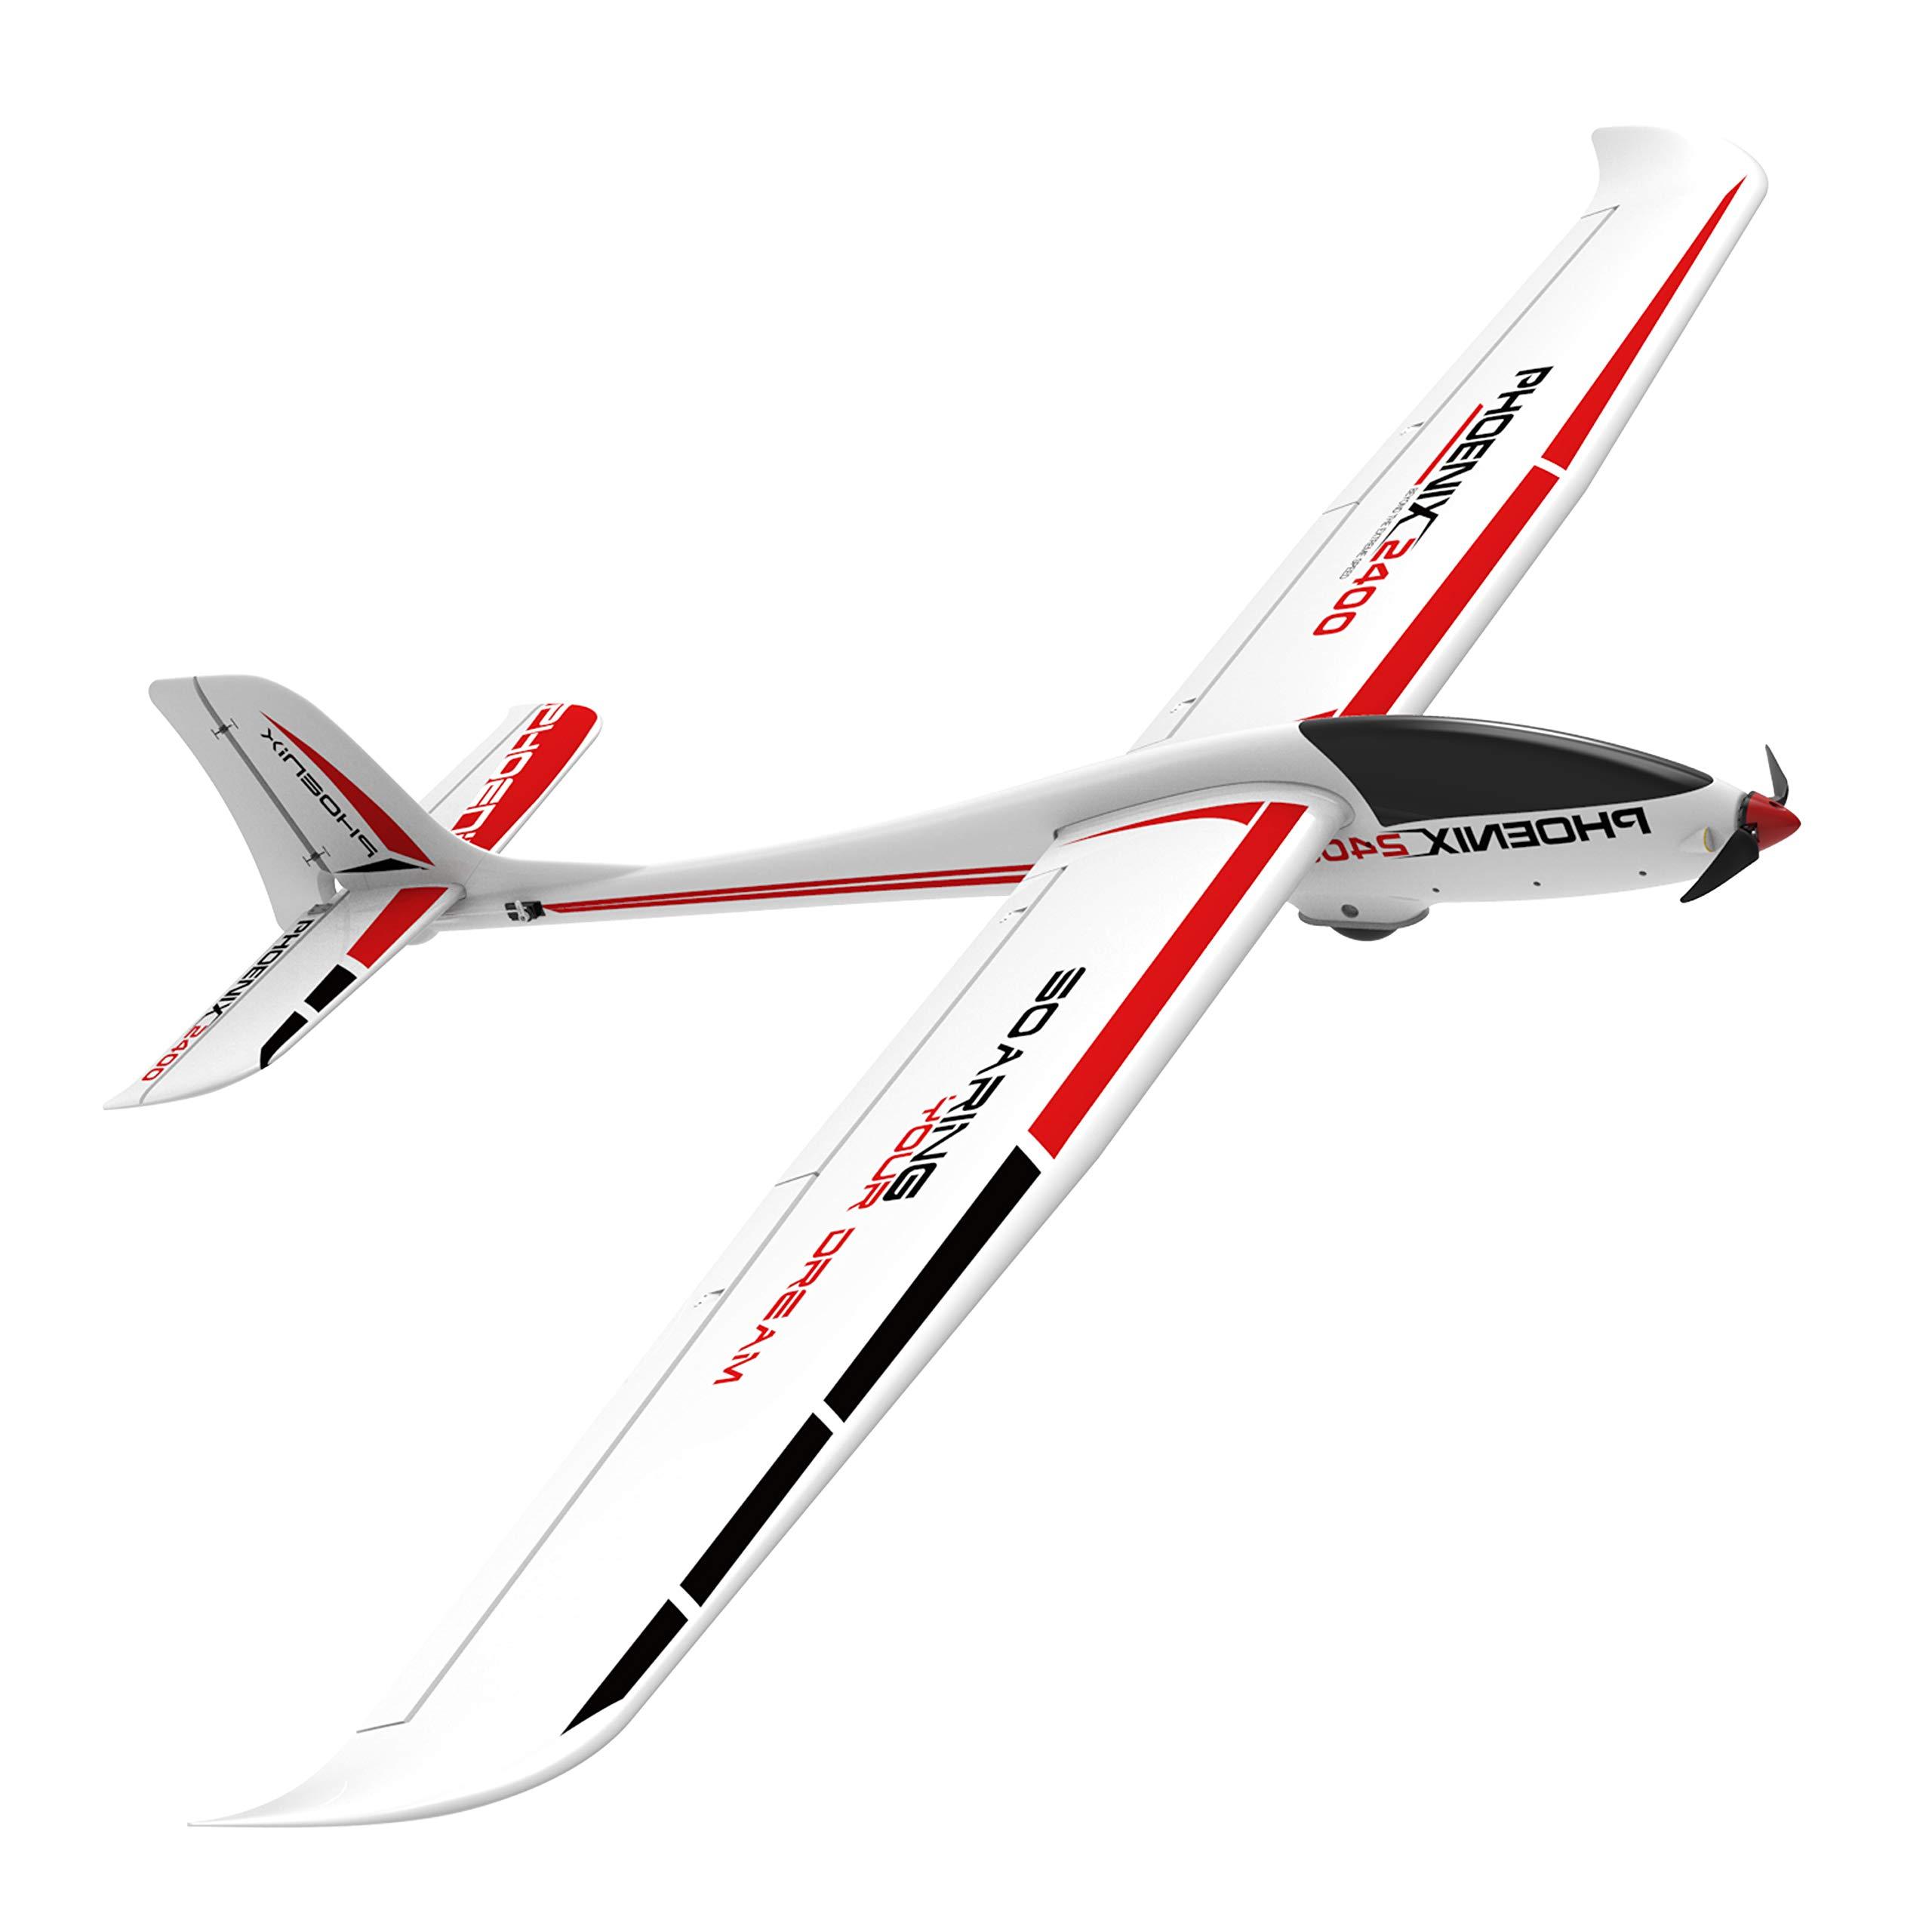 Airplanes Rc Remote Control: Experience the thrill of flying with RC remote control airplanes.